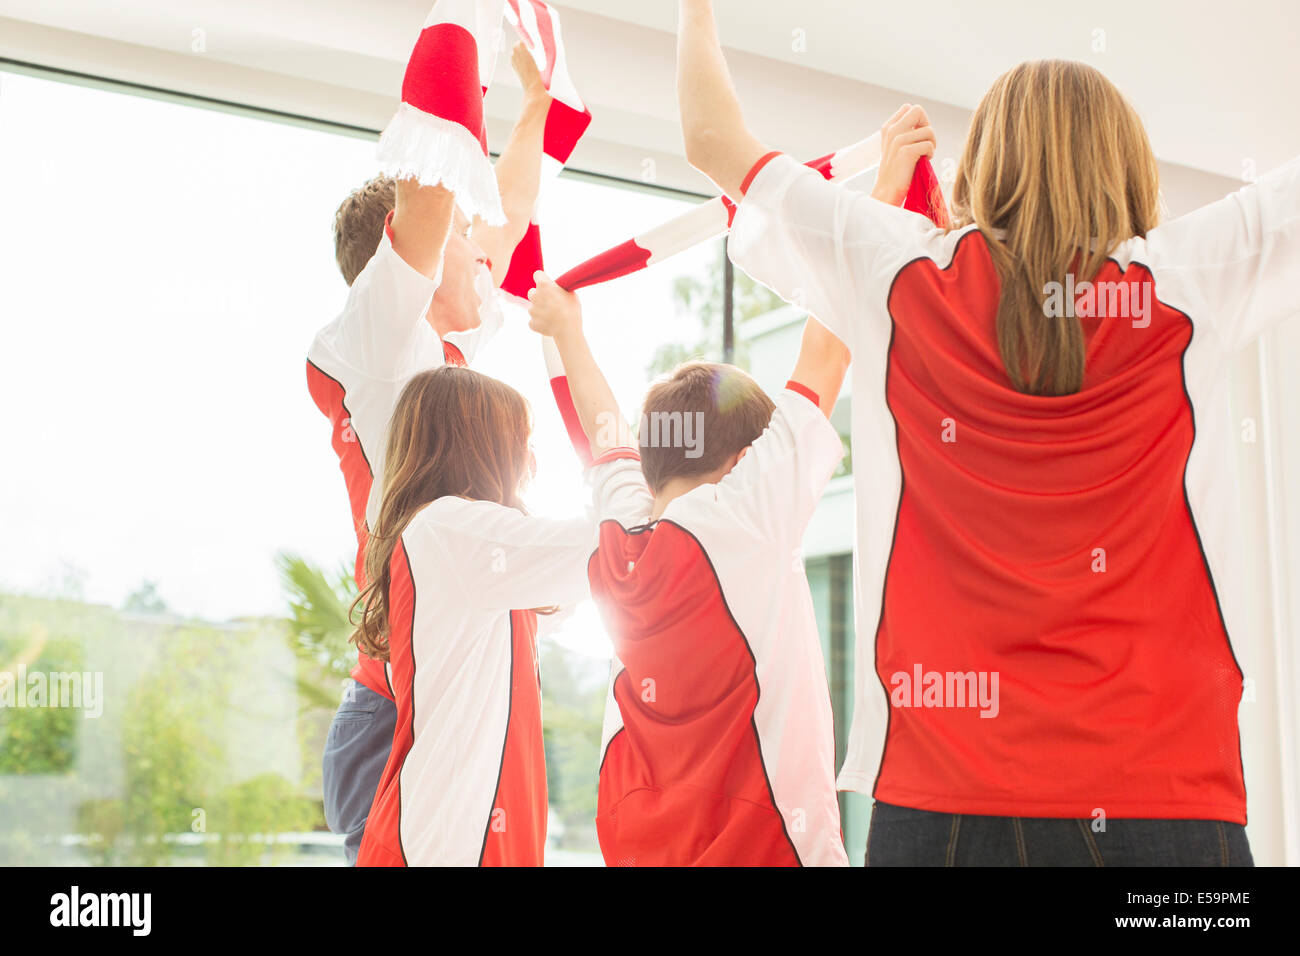 Family in sports jerseys cheering together Stock Photo